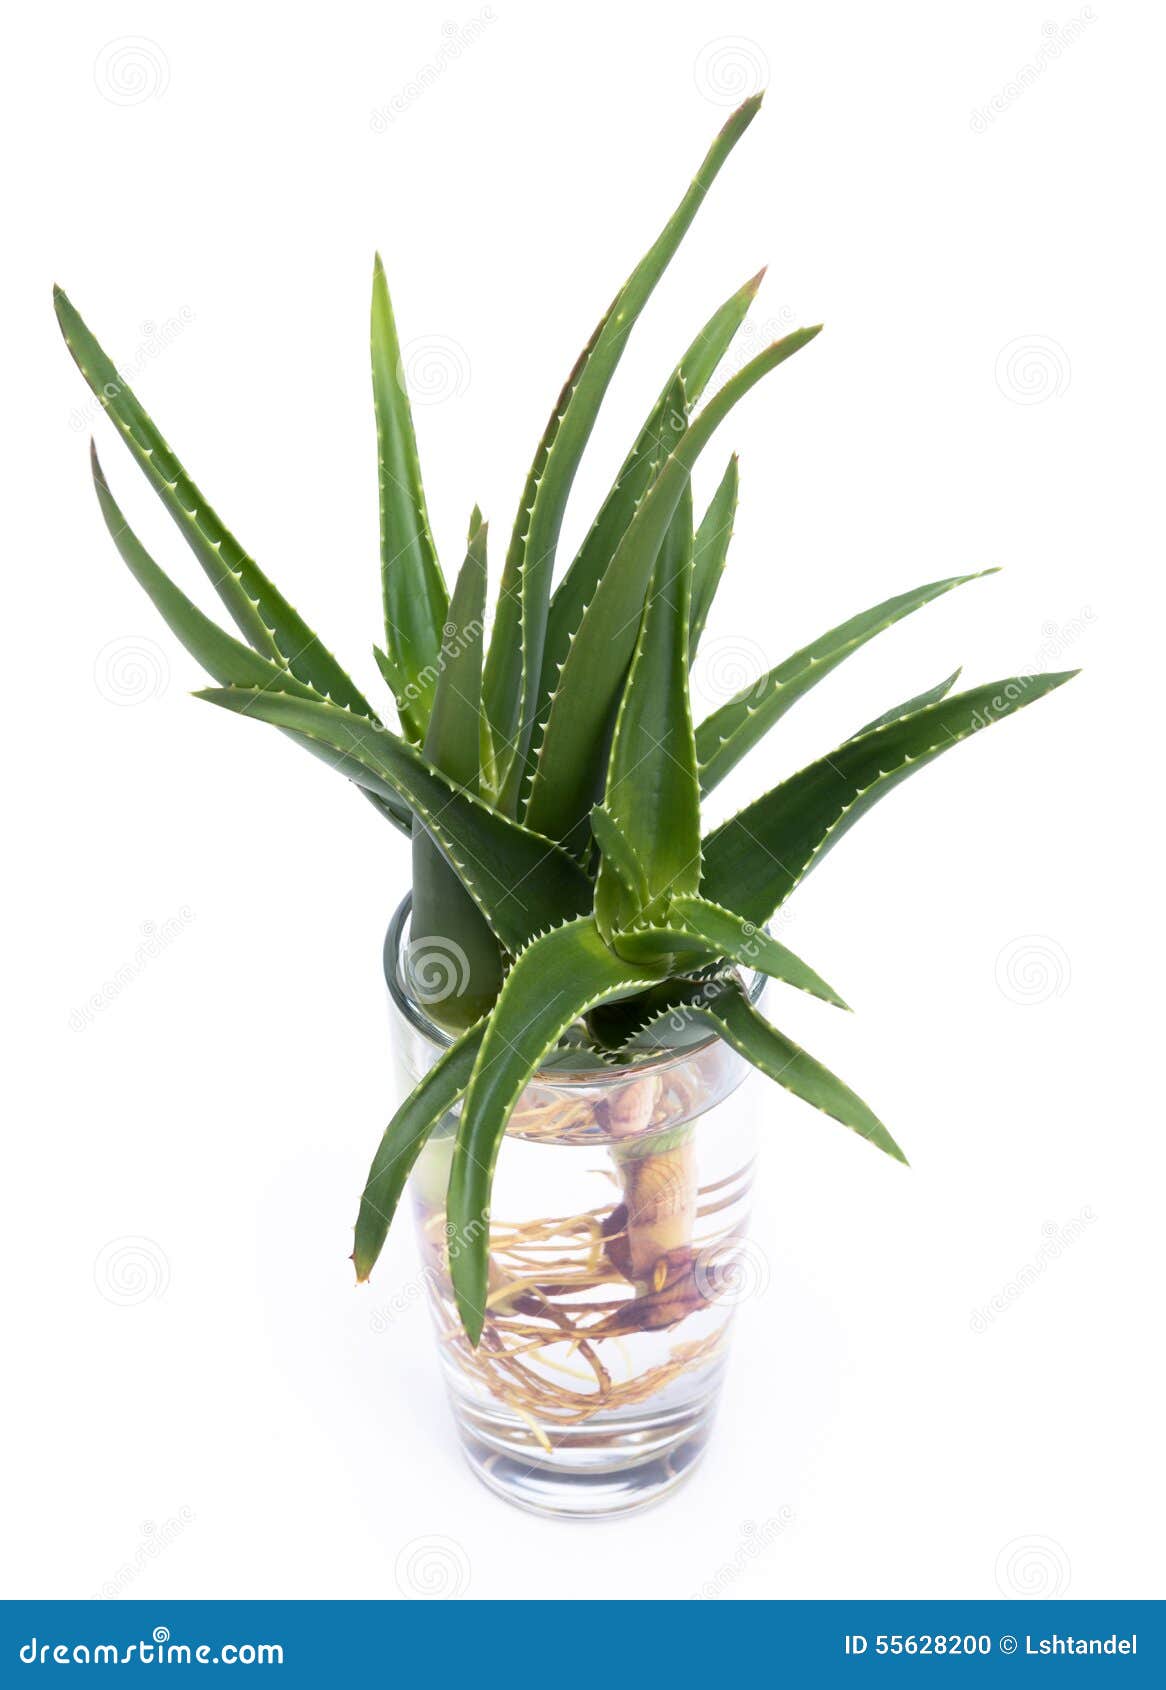 Aloe Vera With Roots In A Glass Of Water Stock Photo Image Of